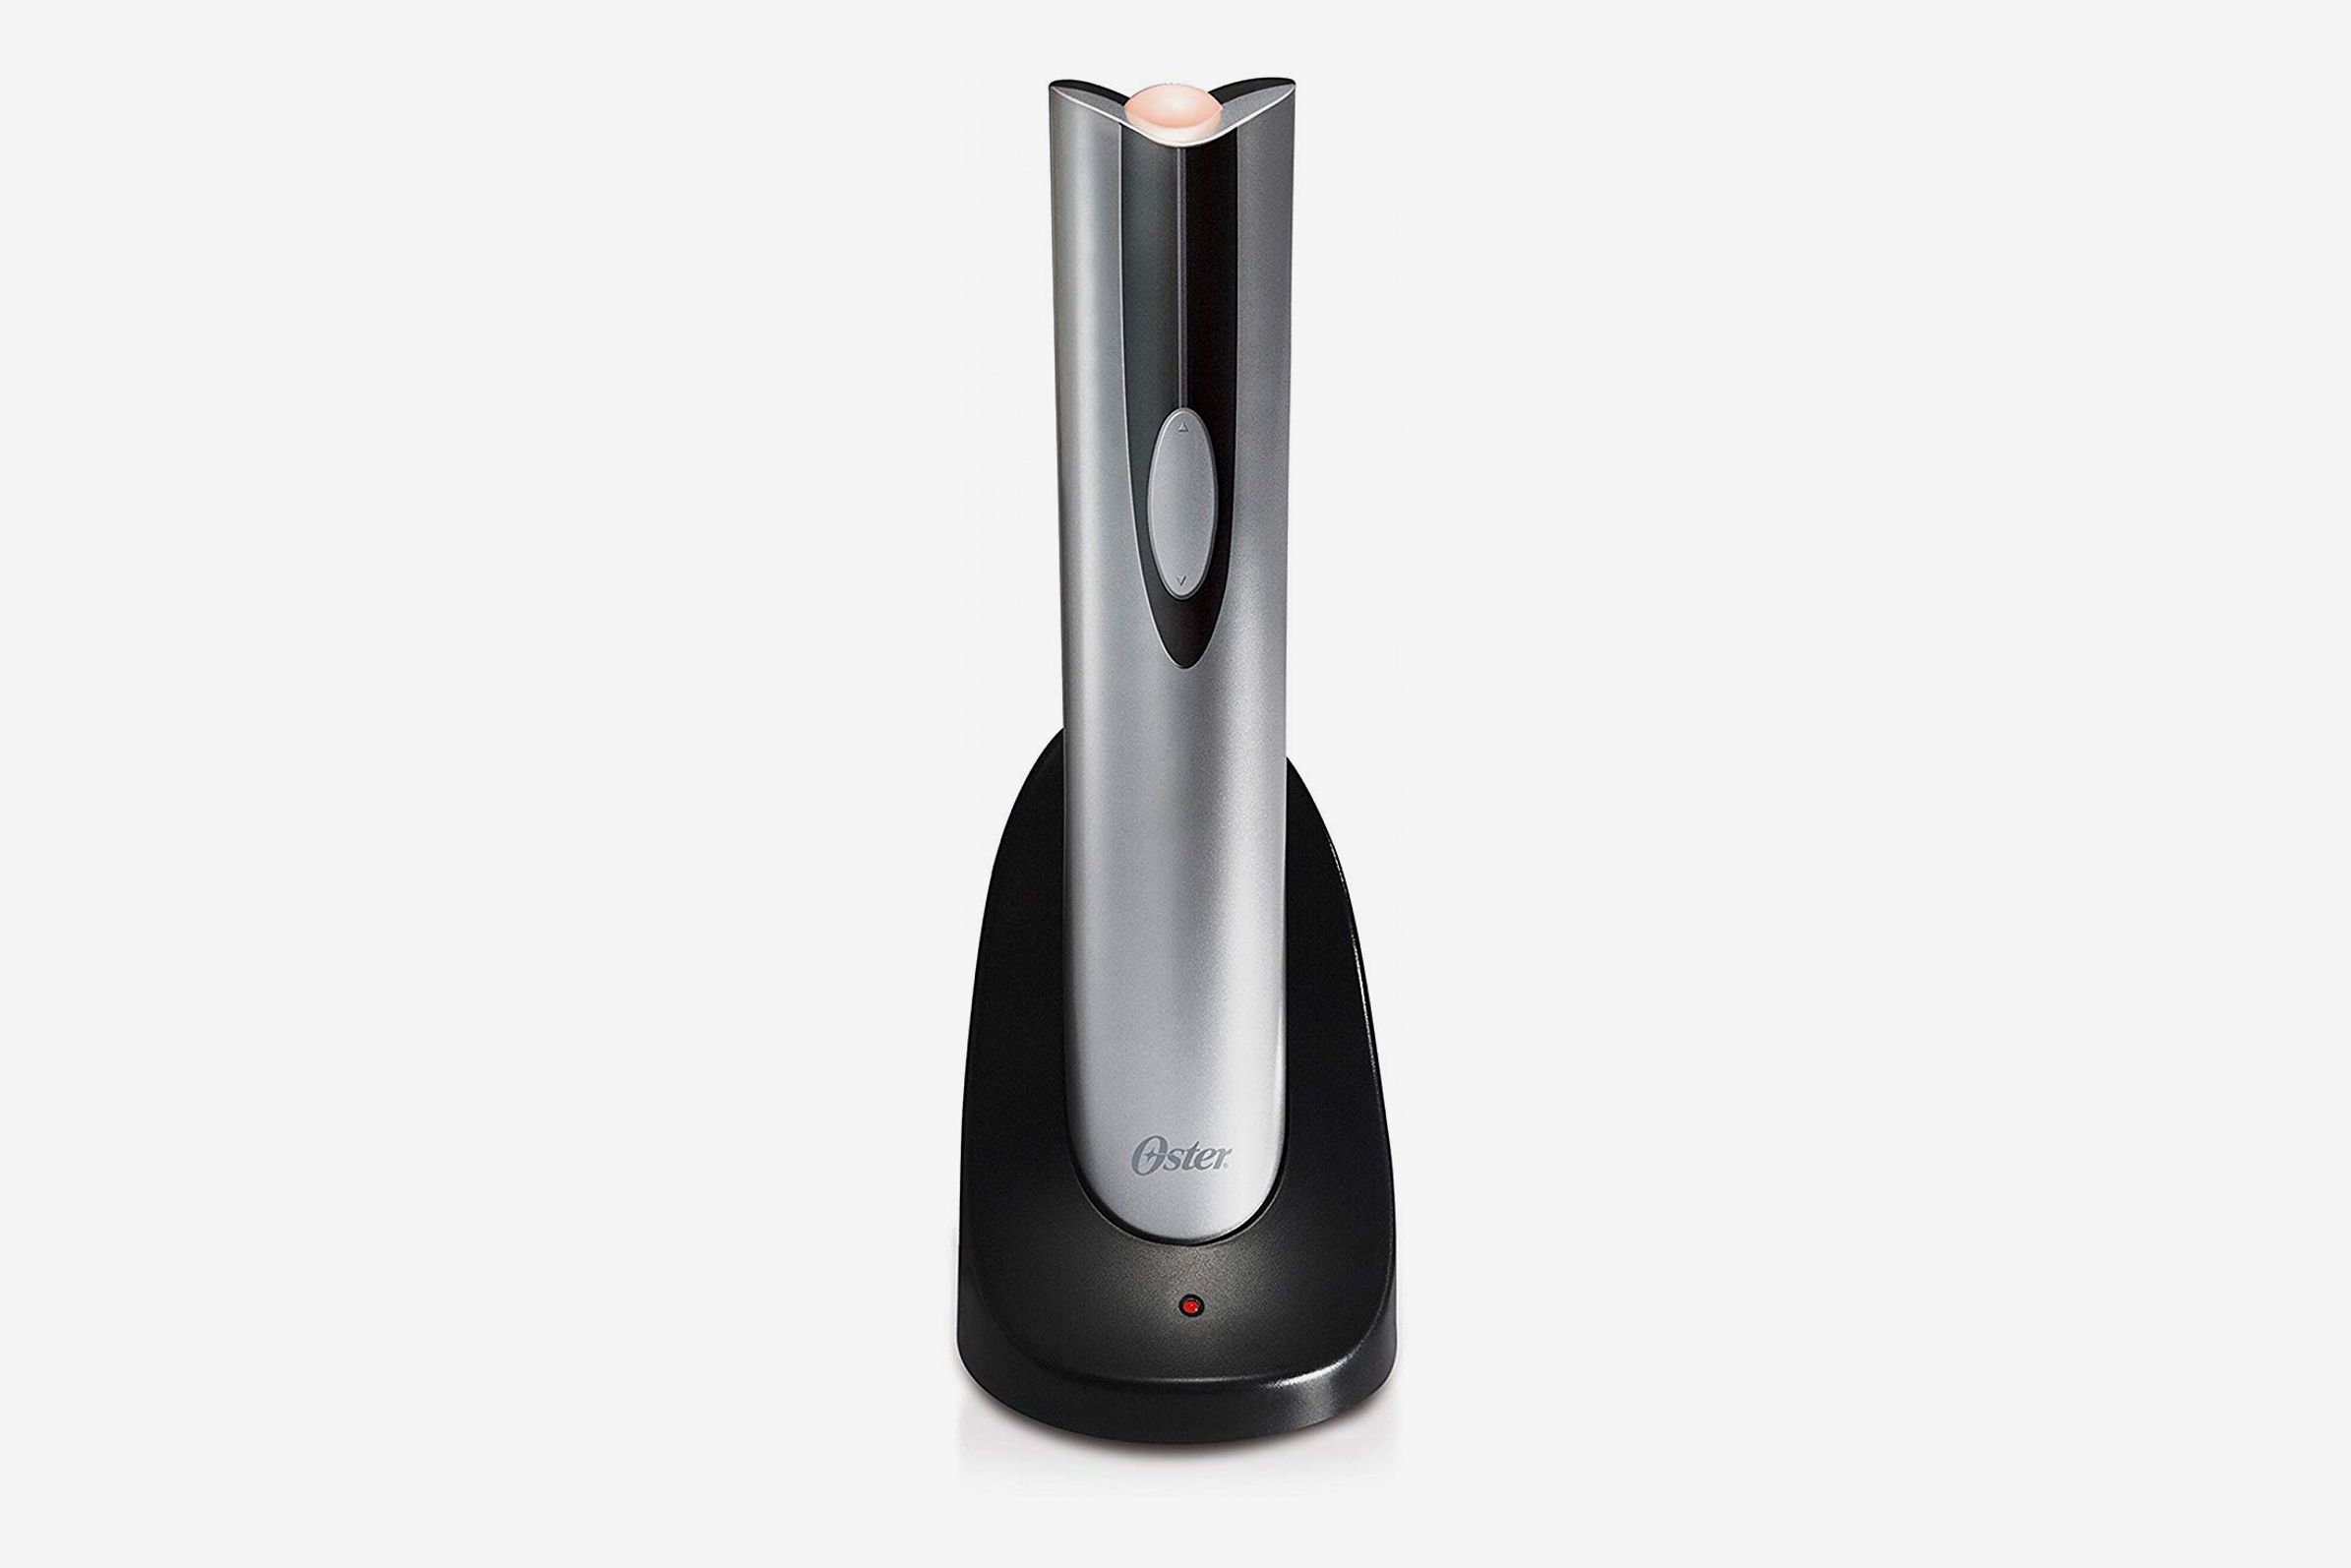 ELECTRIC WINE BOTTLE OPENER FROM UNCLE VINER